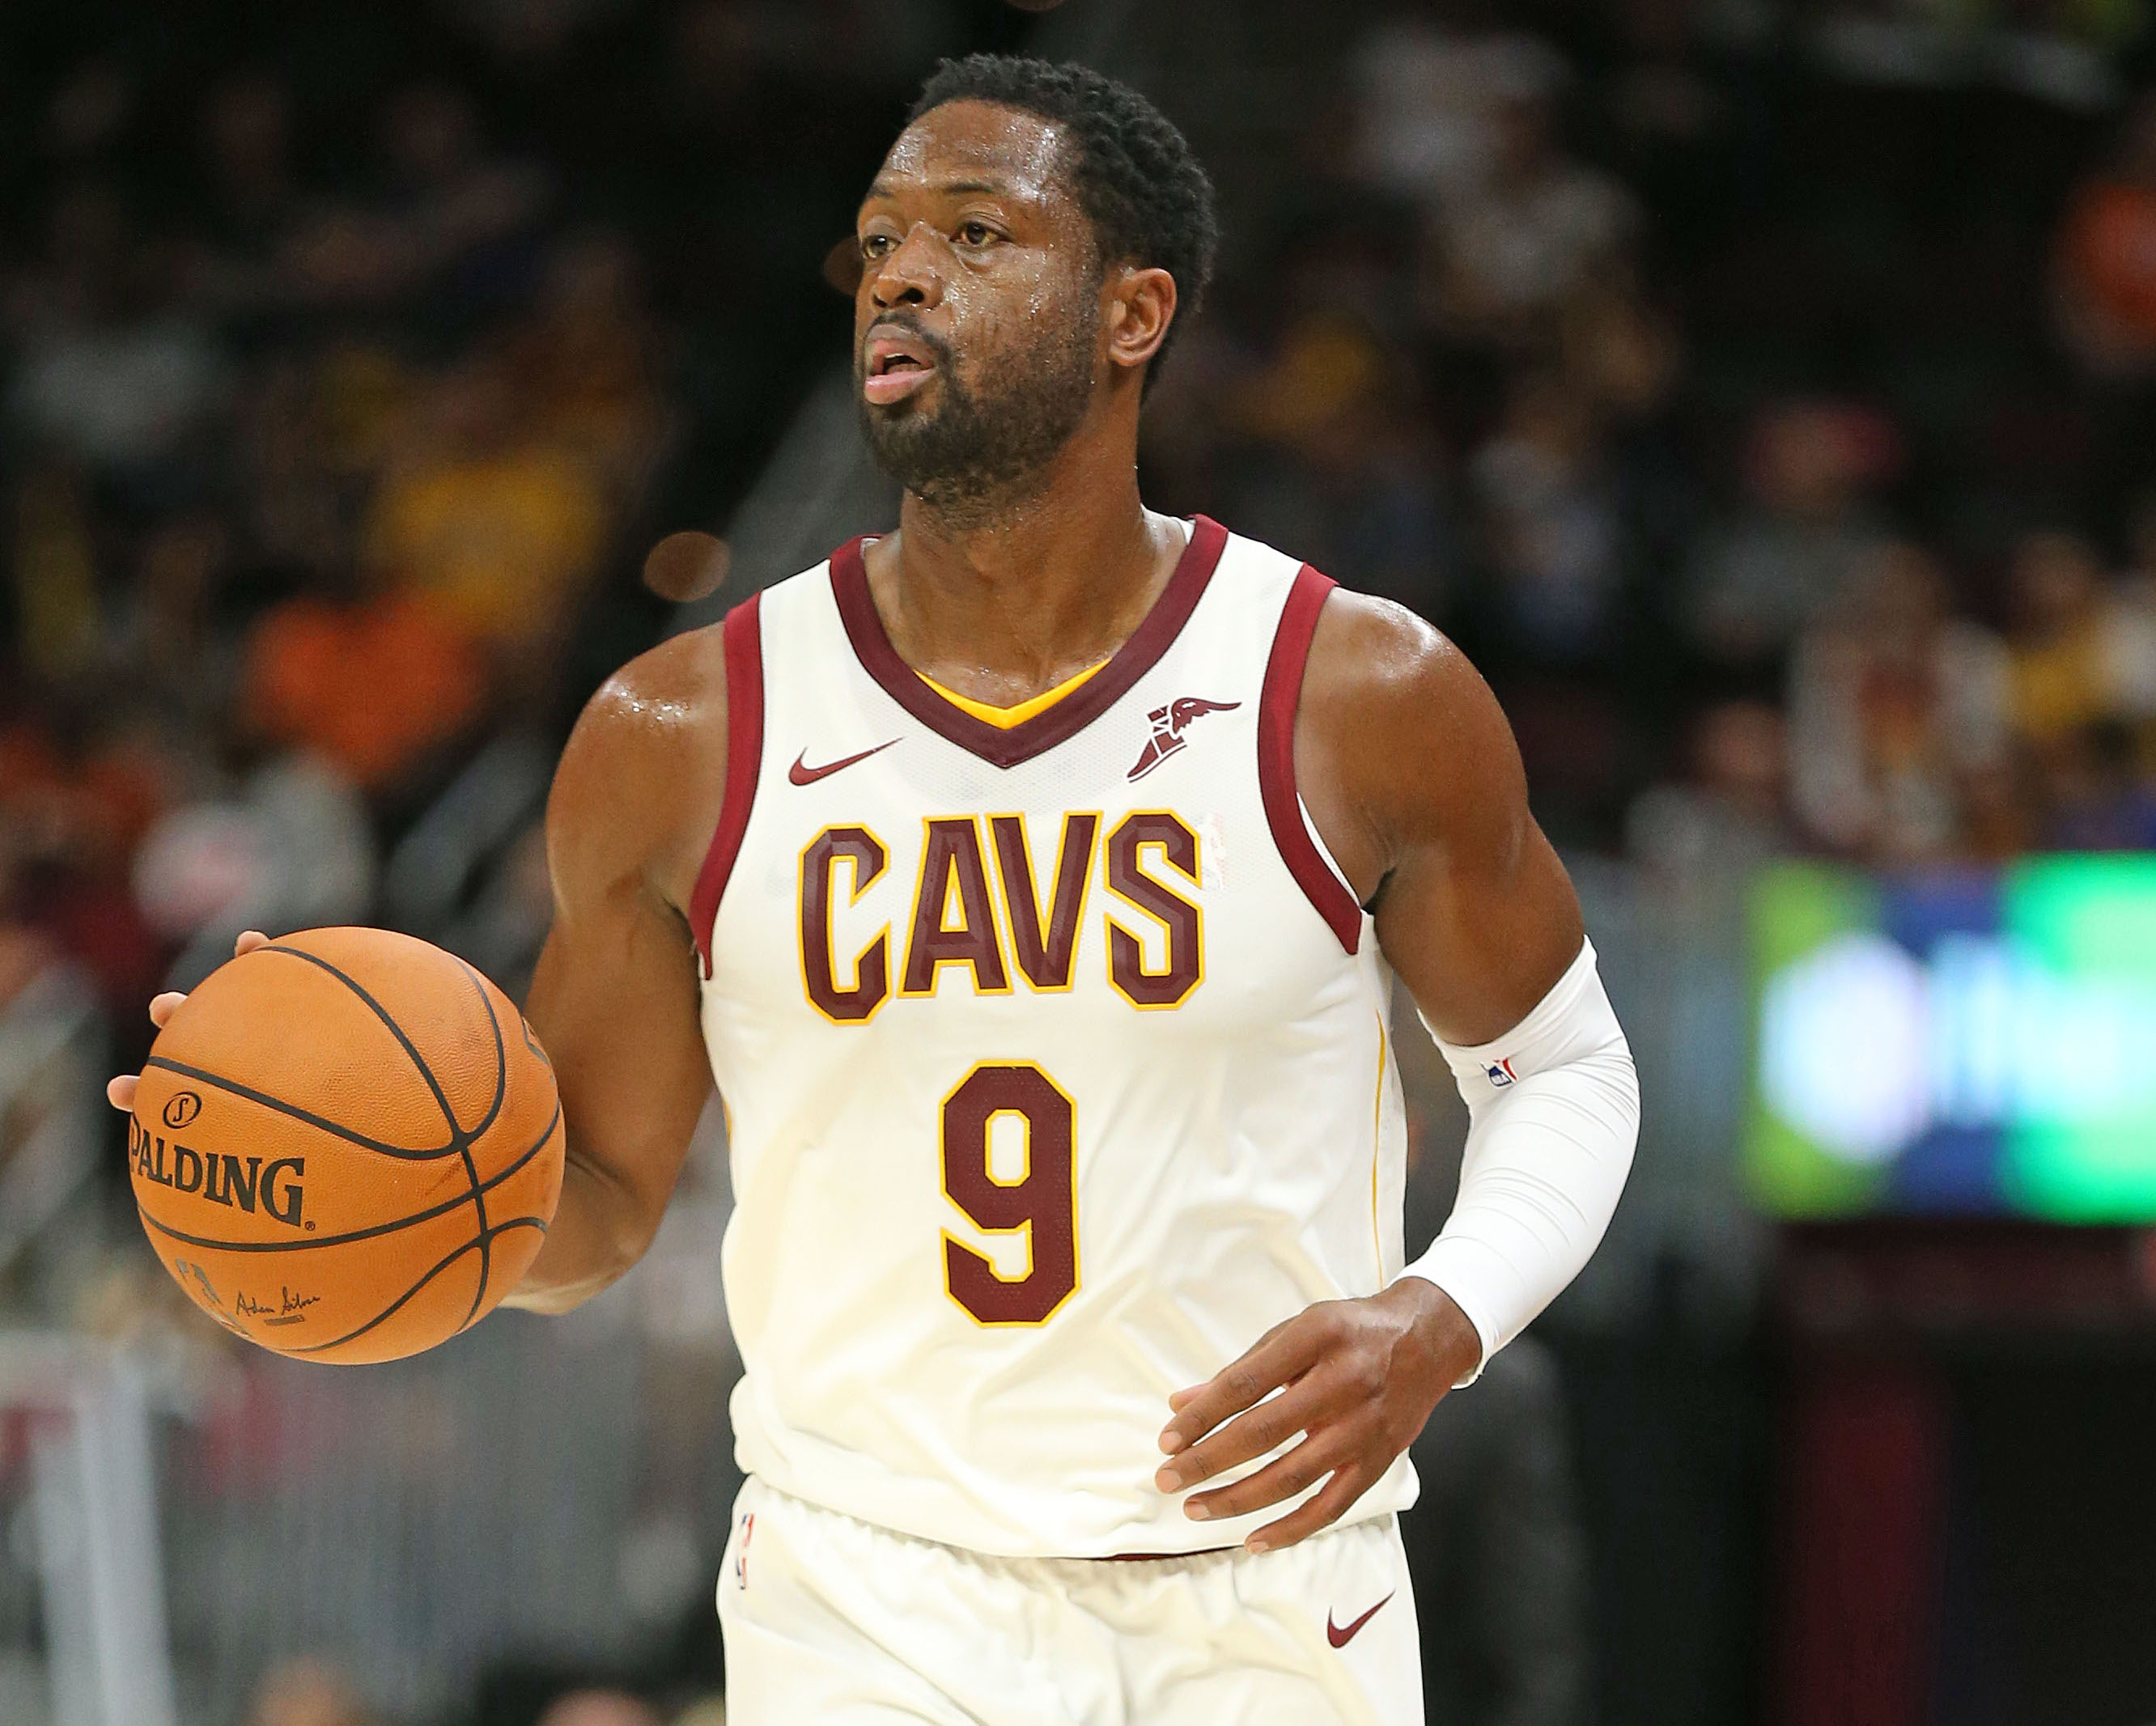 2023 Basketball Hall of Fame Class: Dwyane Wade's best plays in a